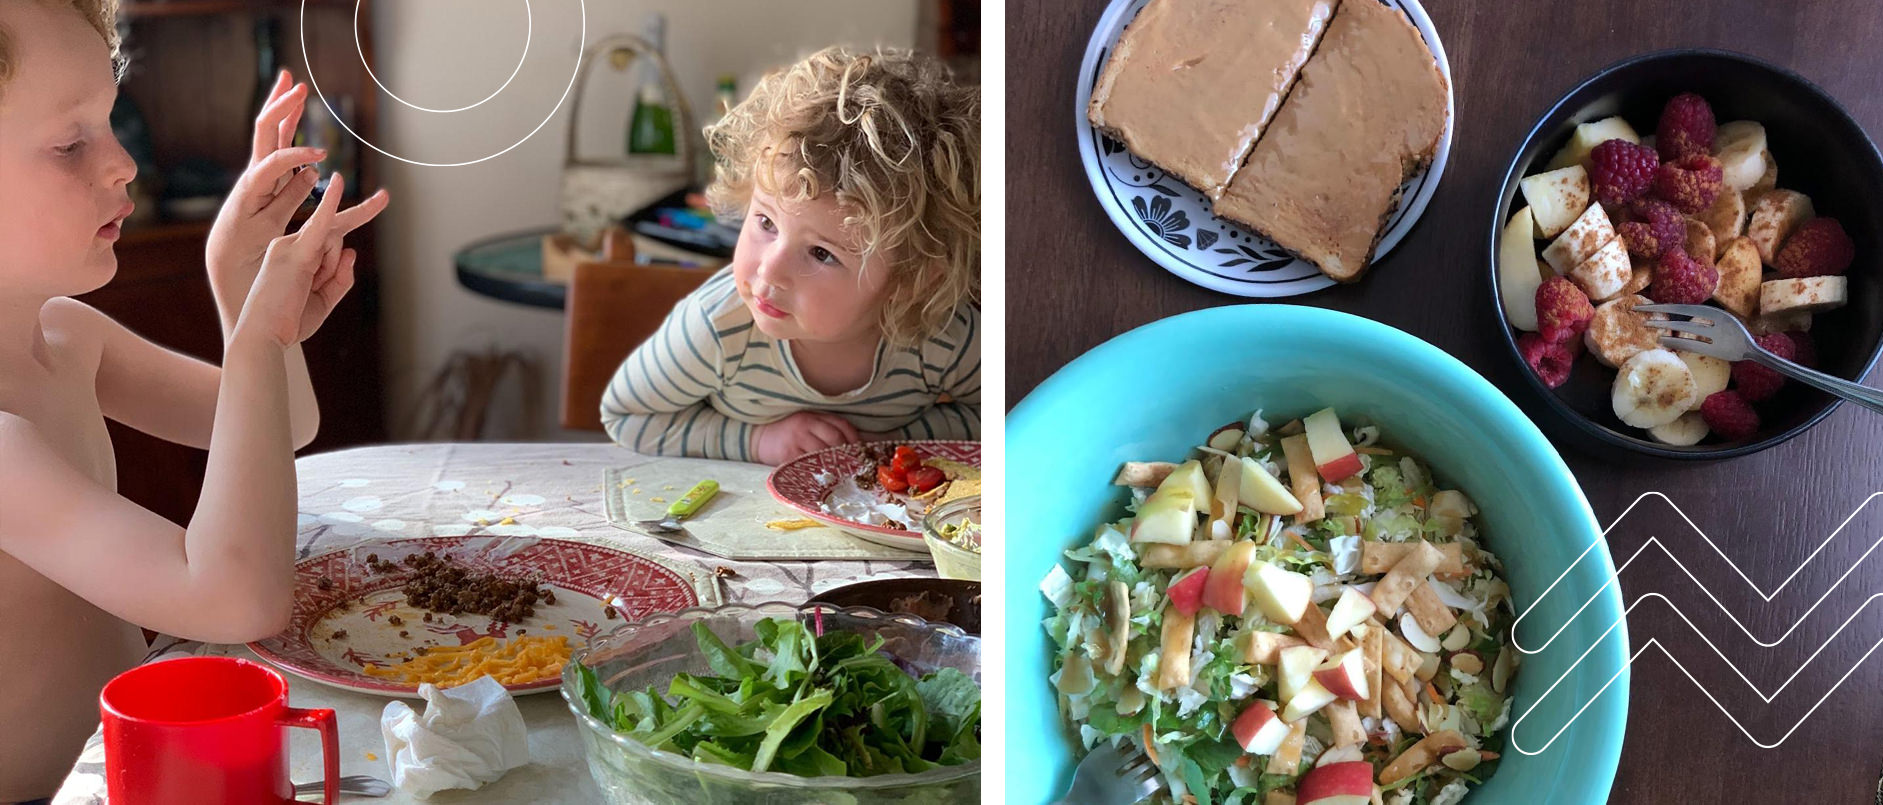 Creativity in Parenting - Eating Well